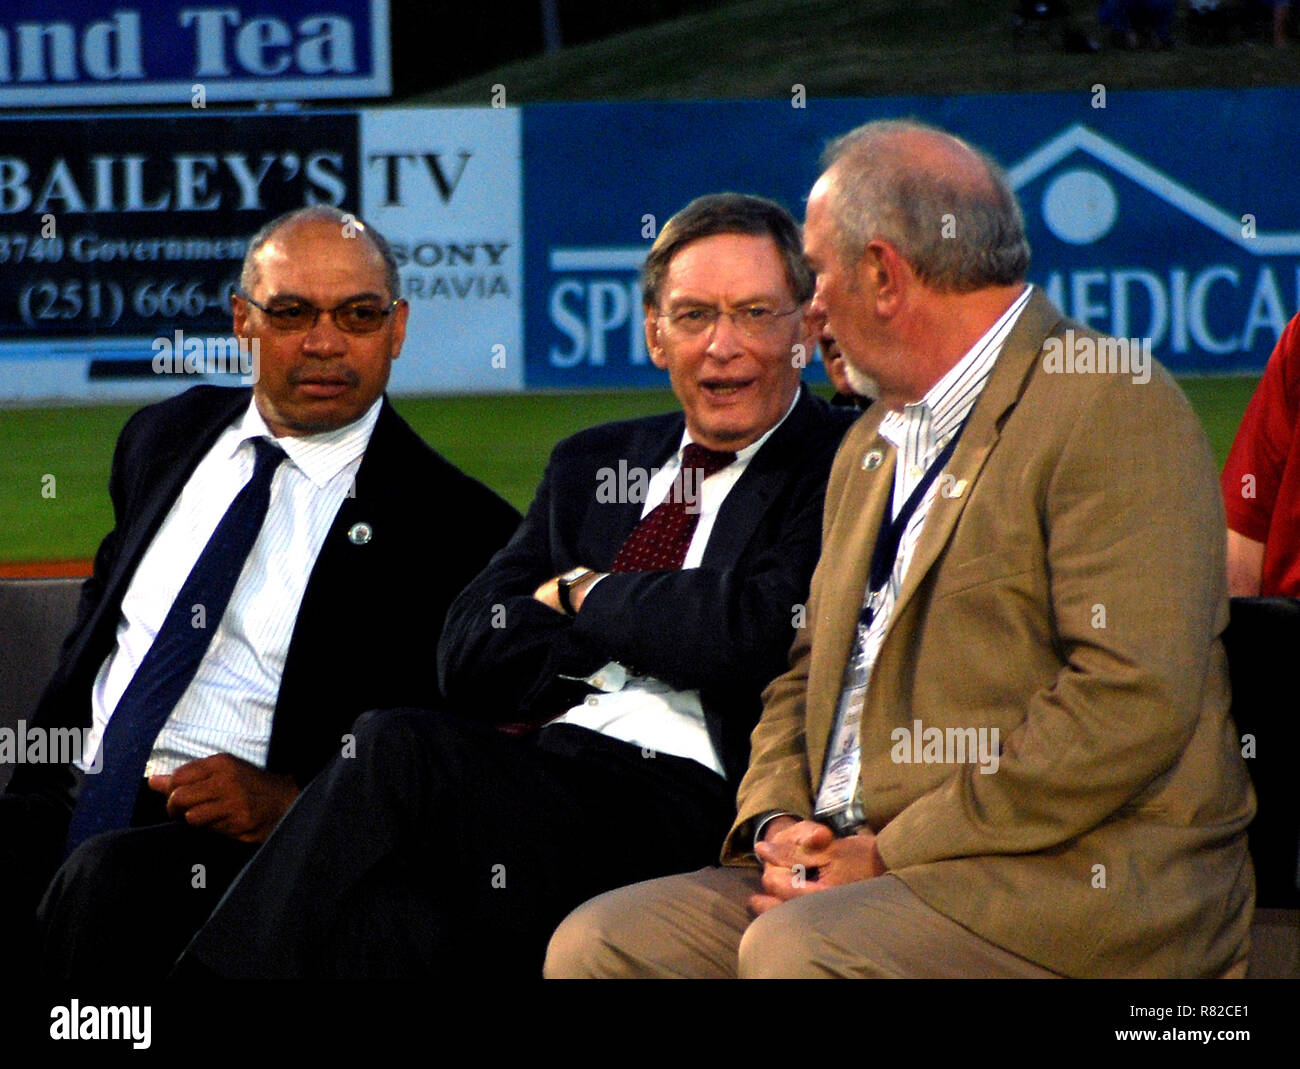 Reggie Jackson, Major League Baseball Commissioner Bud Selig, and Bruce Sutter talk at the dedication of the Hank Aaron Museum in Mobile, Alabama. Stock Photo